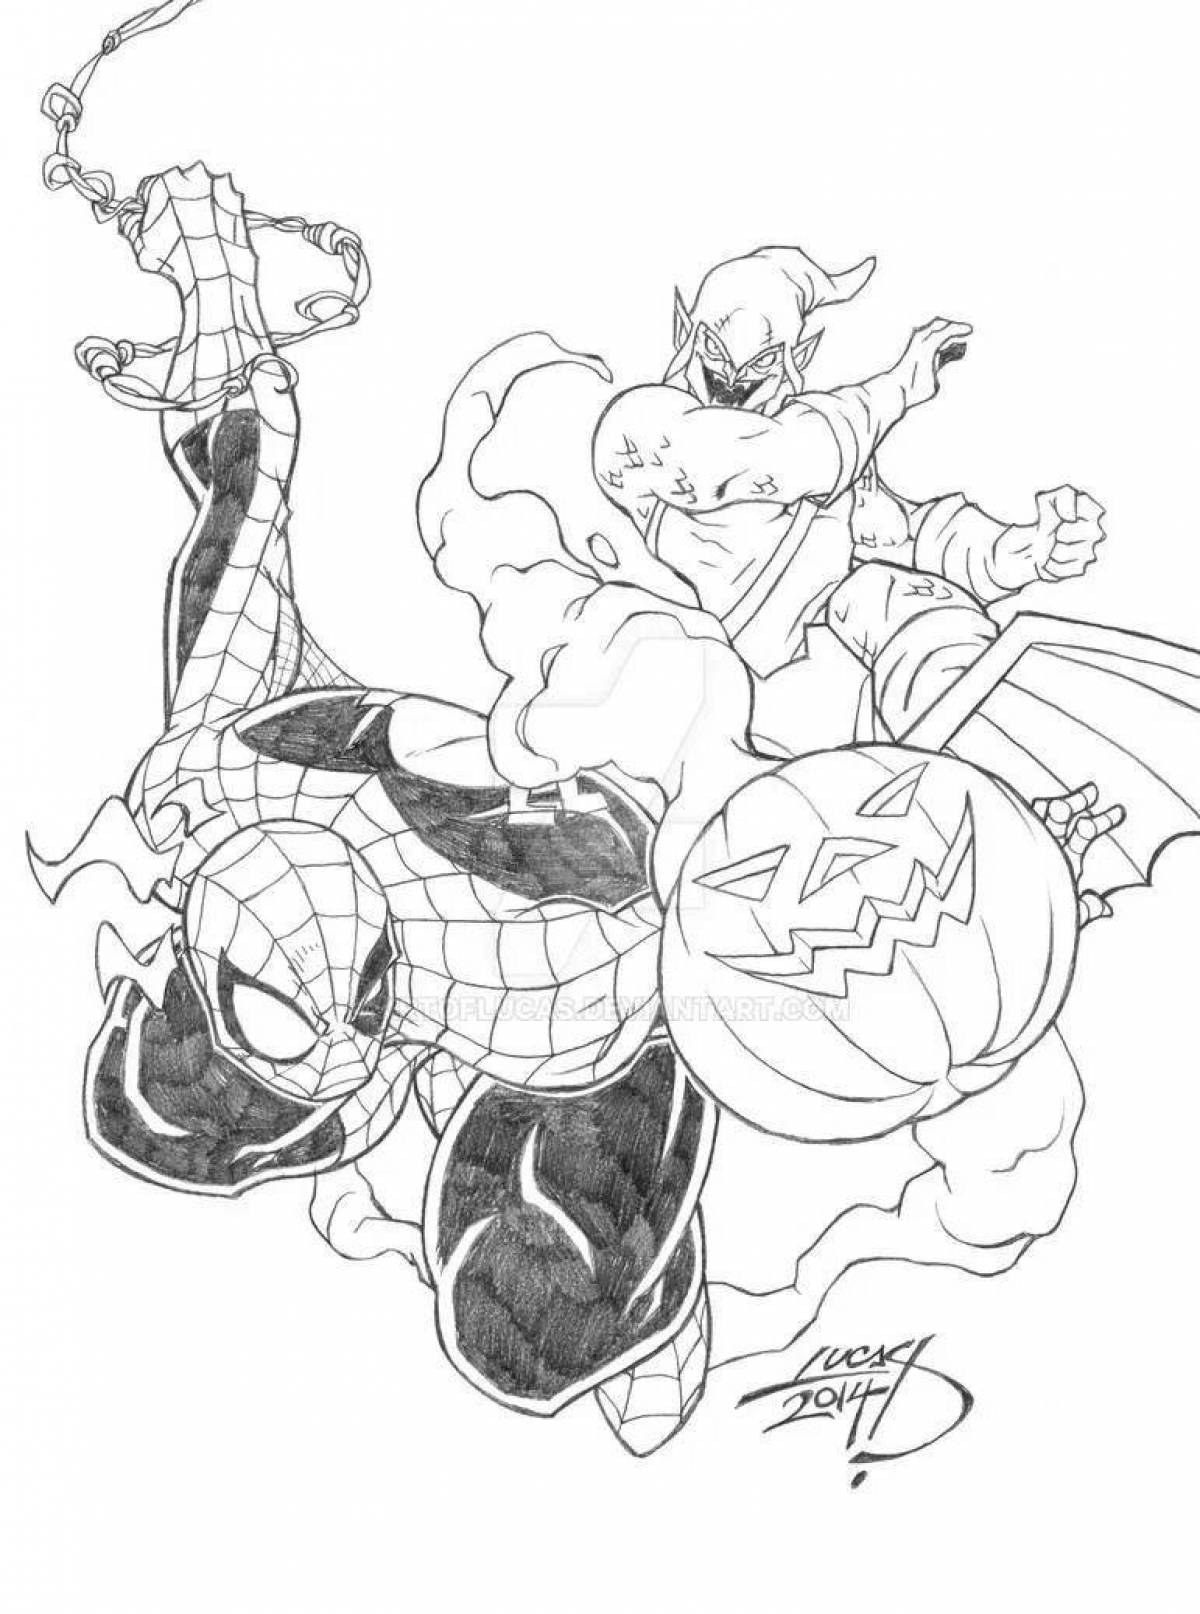 Intriguing Spiderman and Goblin Coloring Page